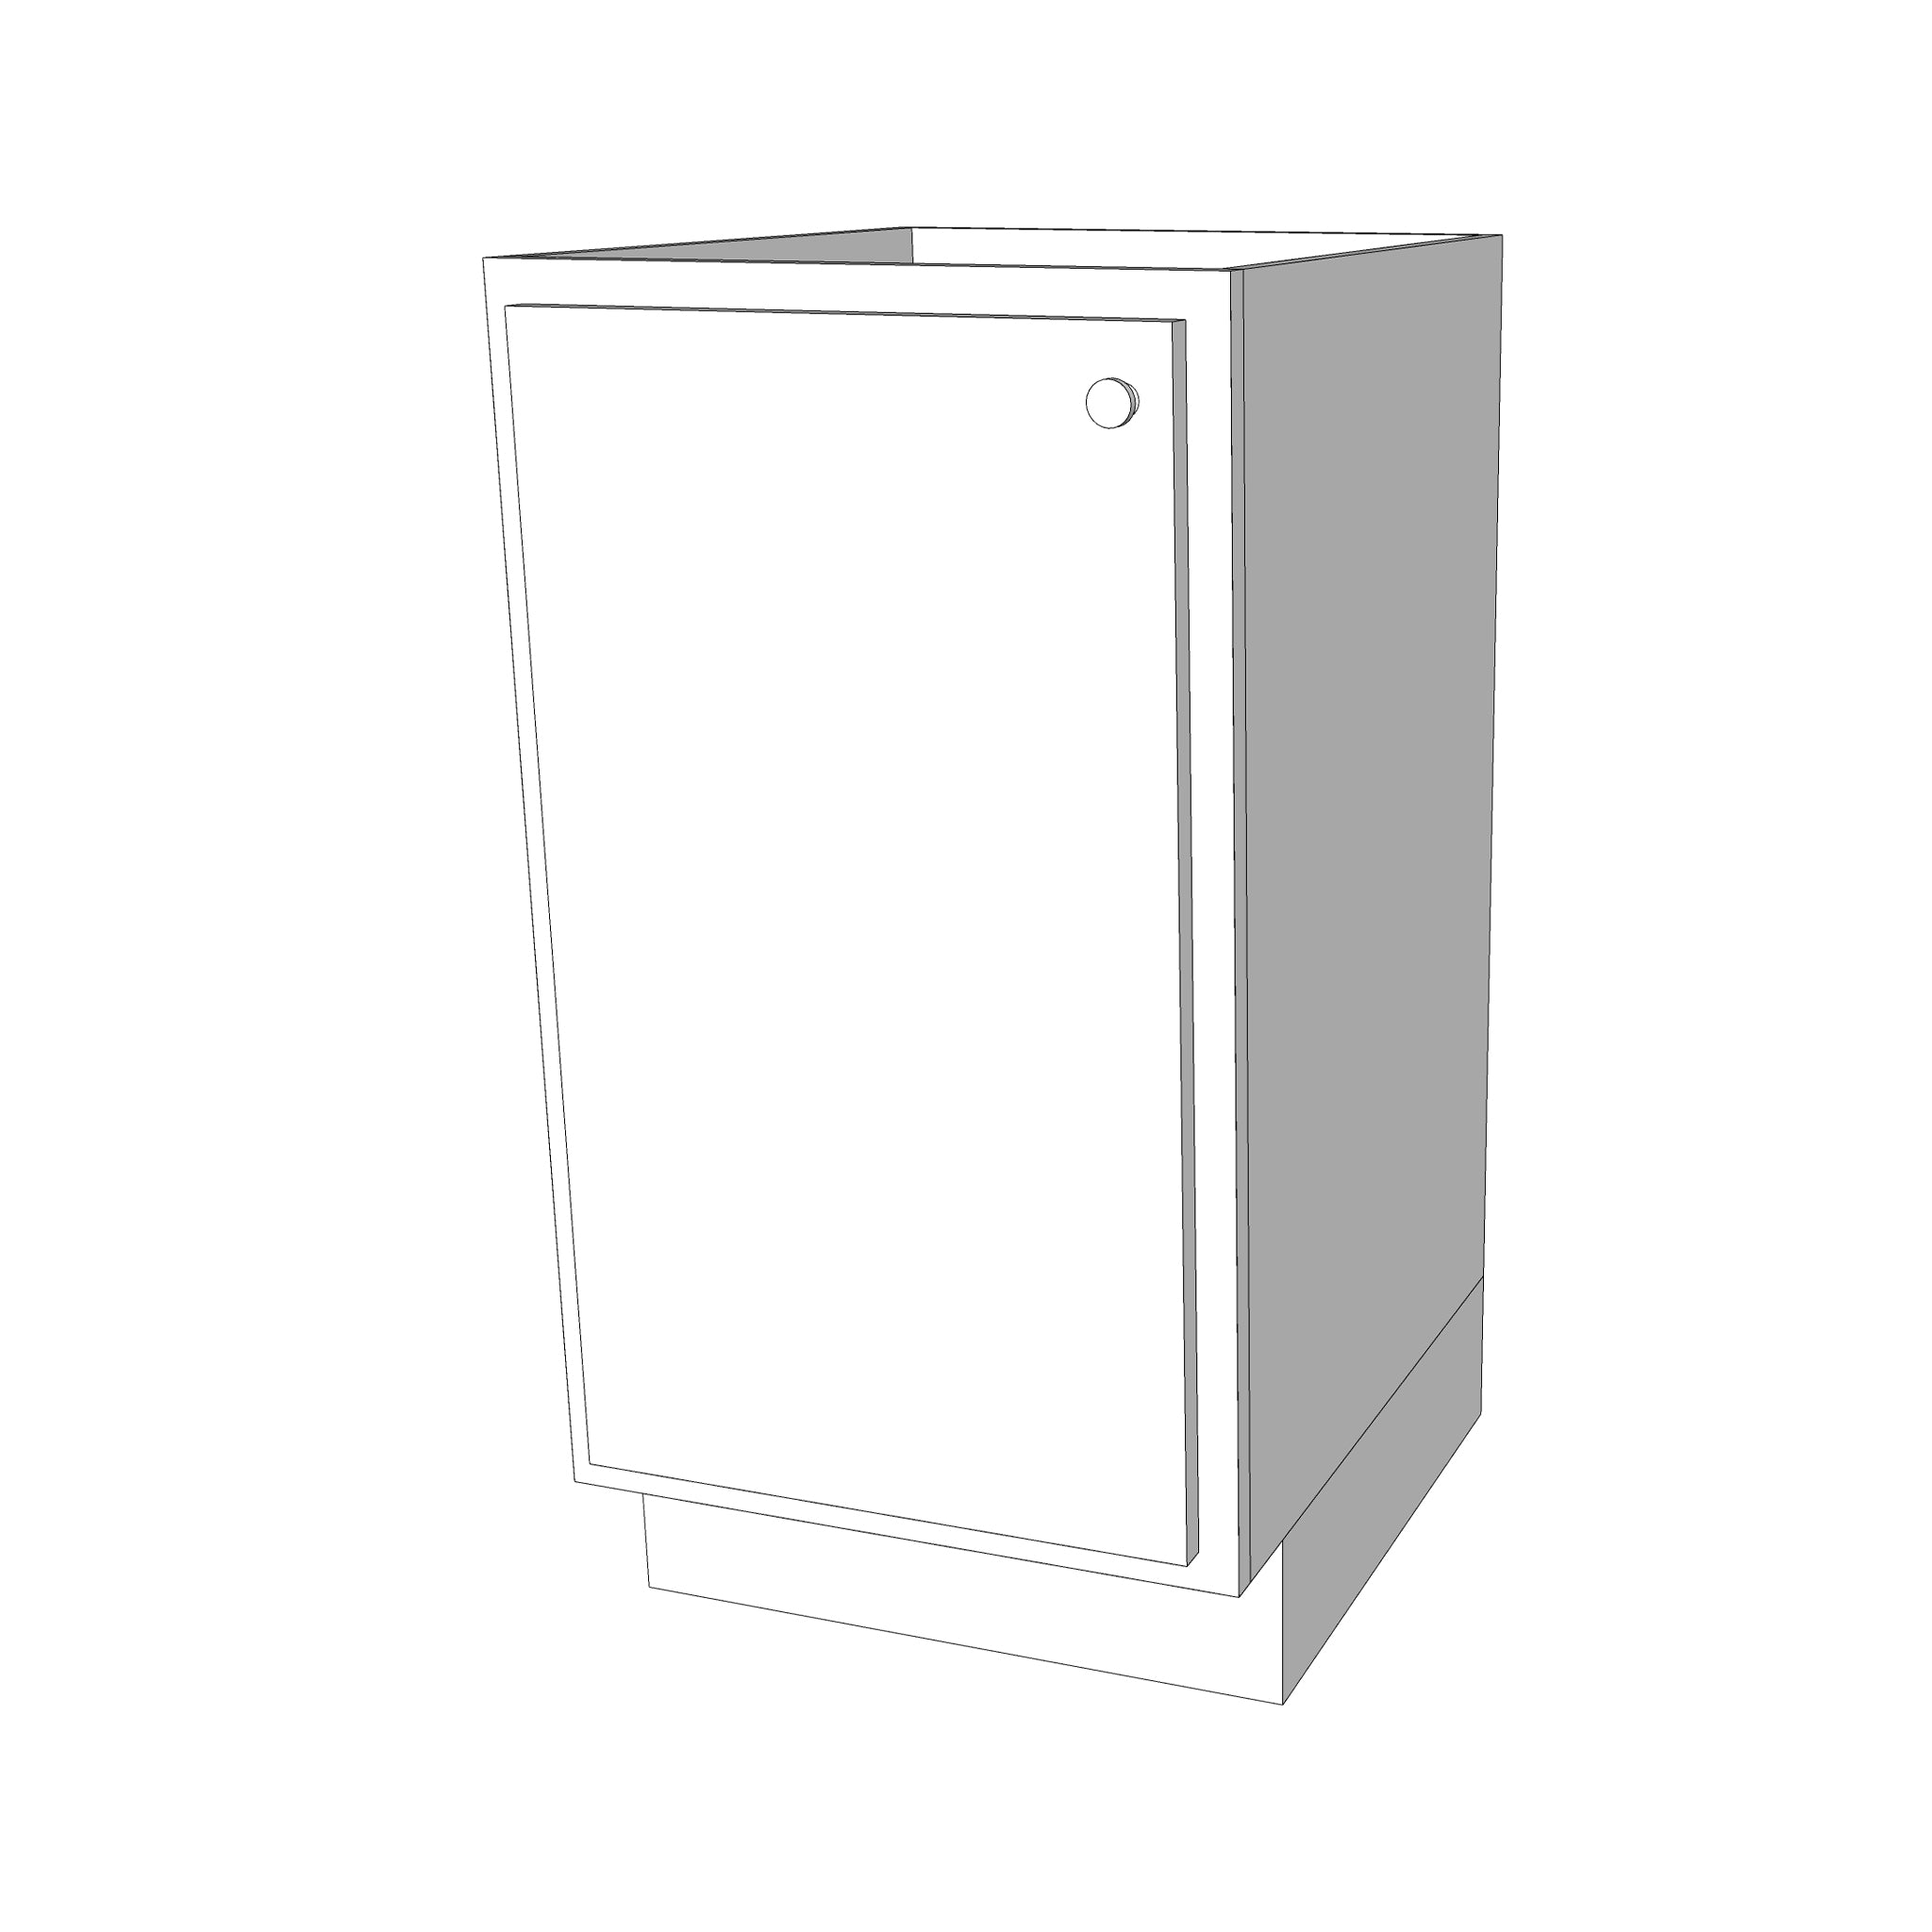 15x30 Full Height Vanity Base Cabinet - Assembled